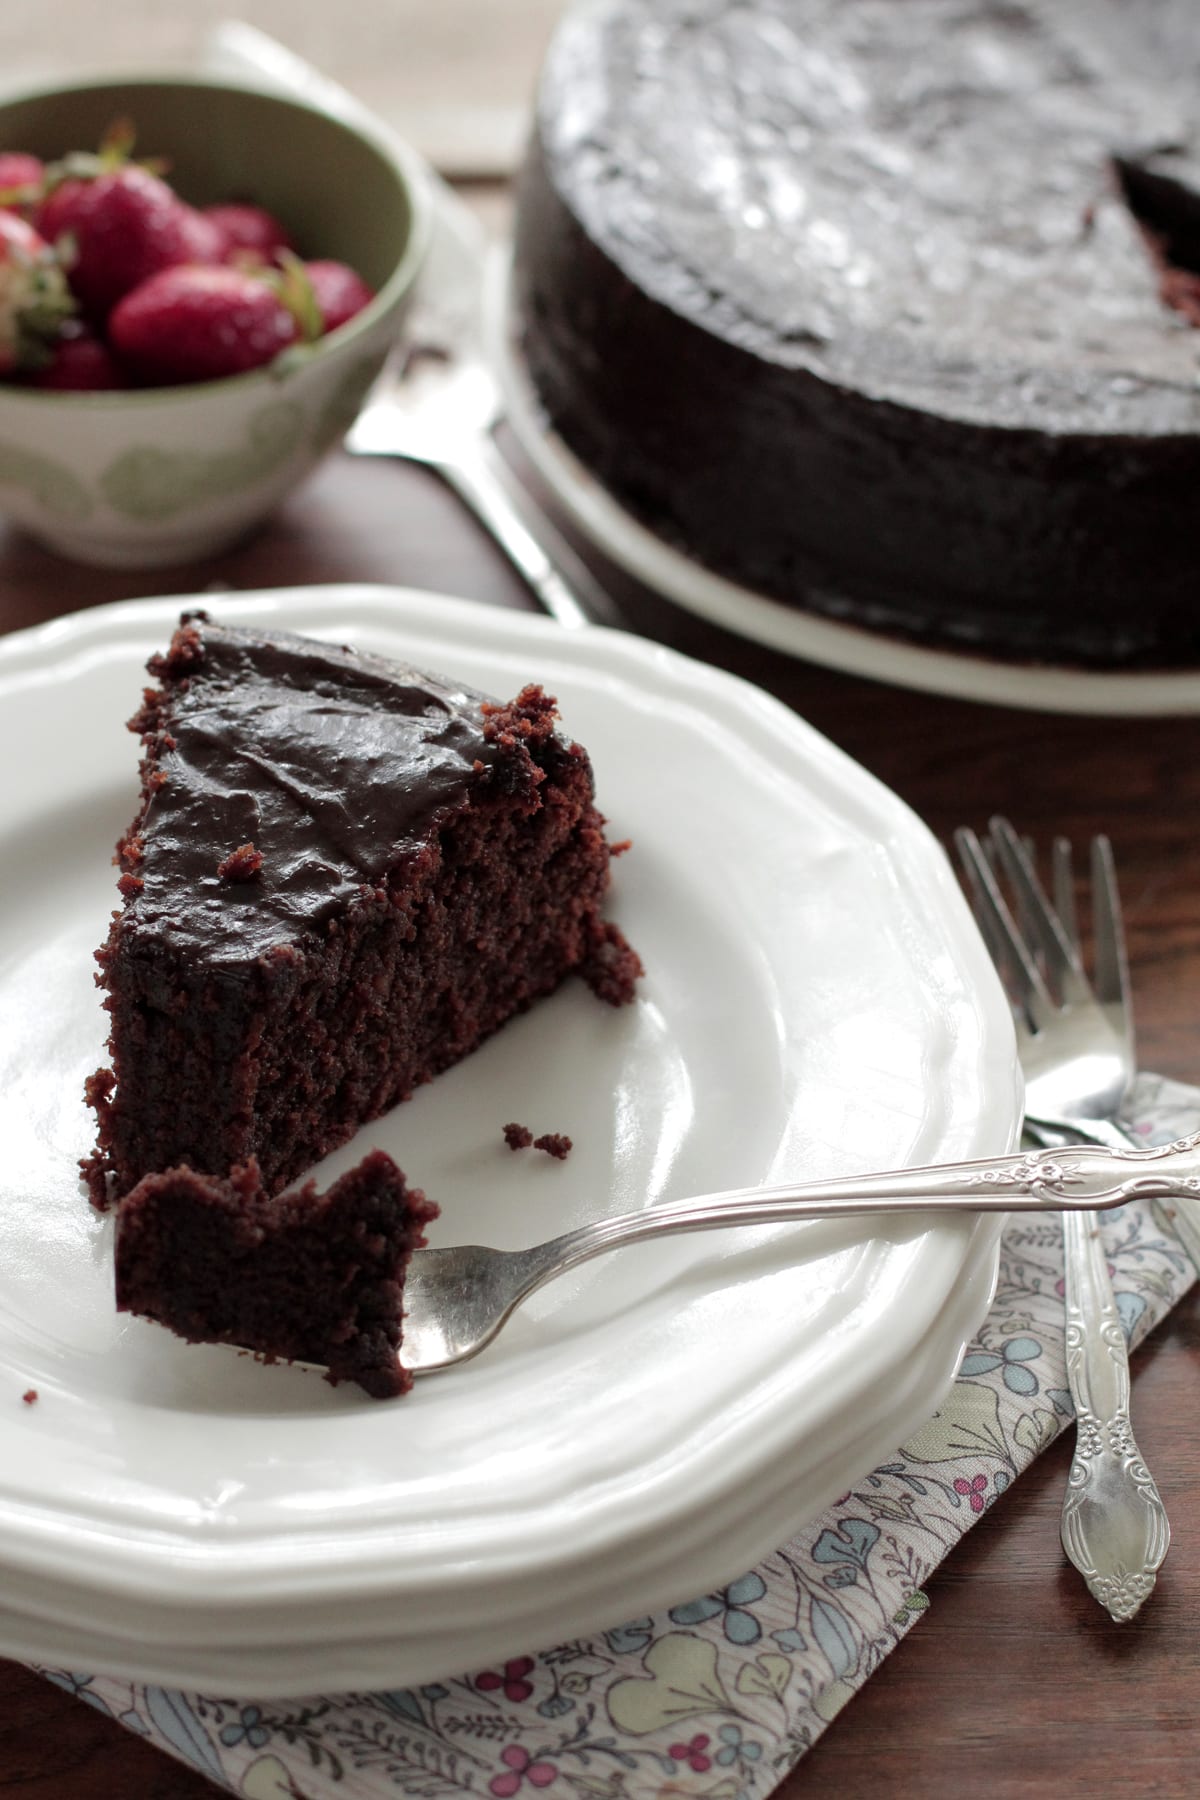 Simple Grain-Free Chocolate Cake with Icing